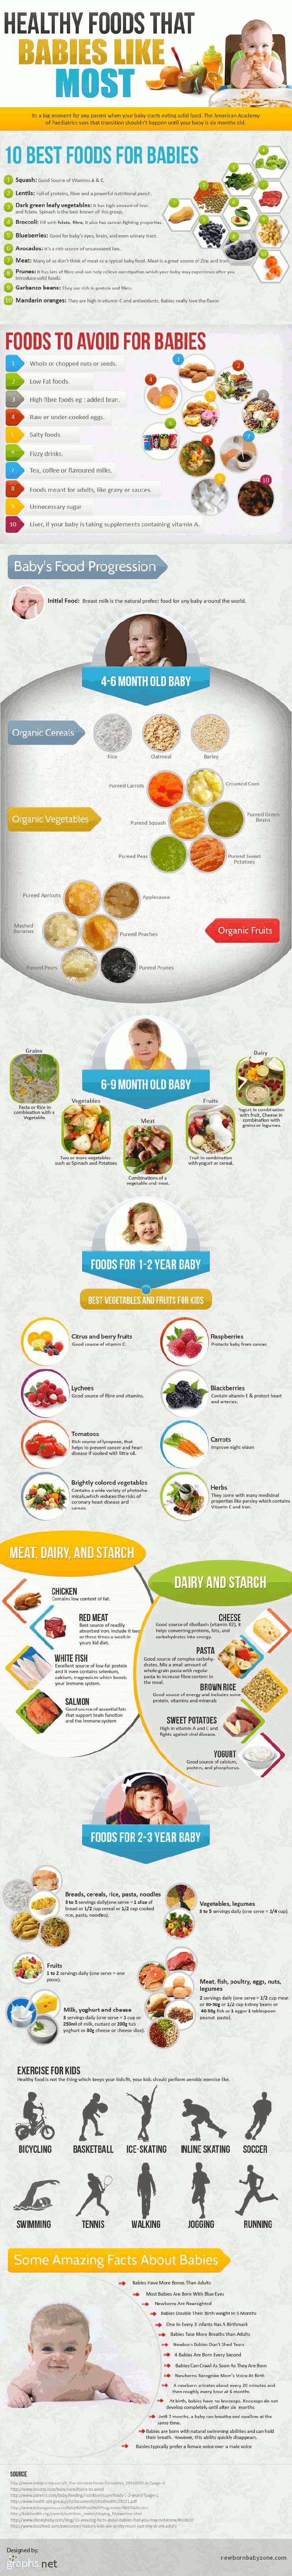 Healthy Foods That Babies Like Most